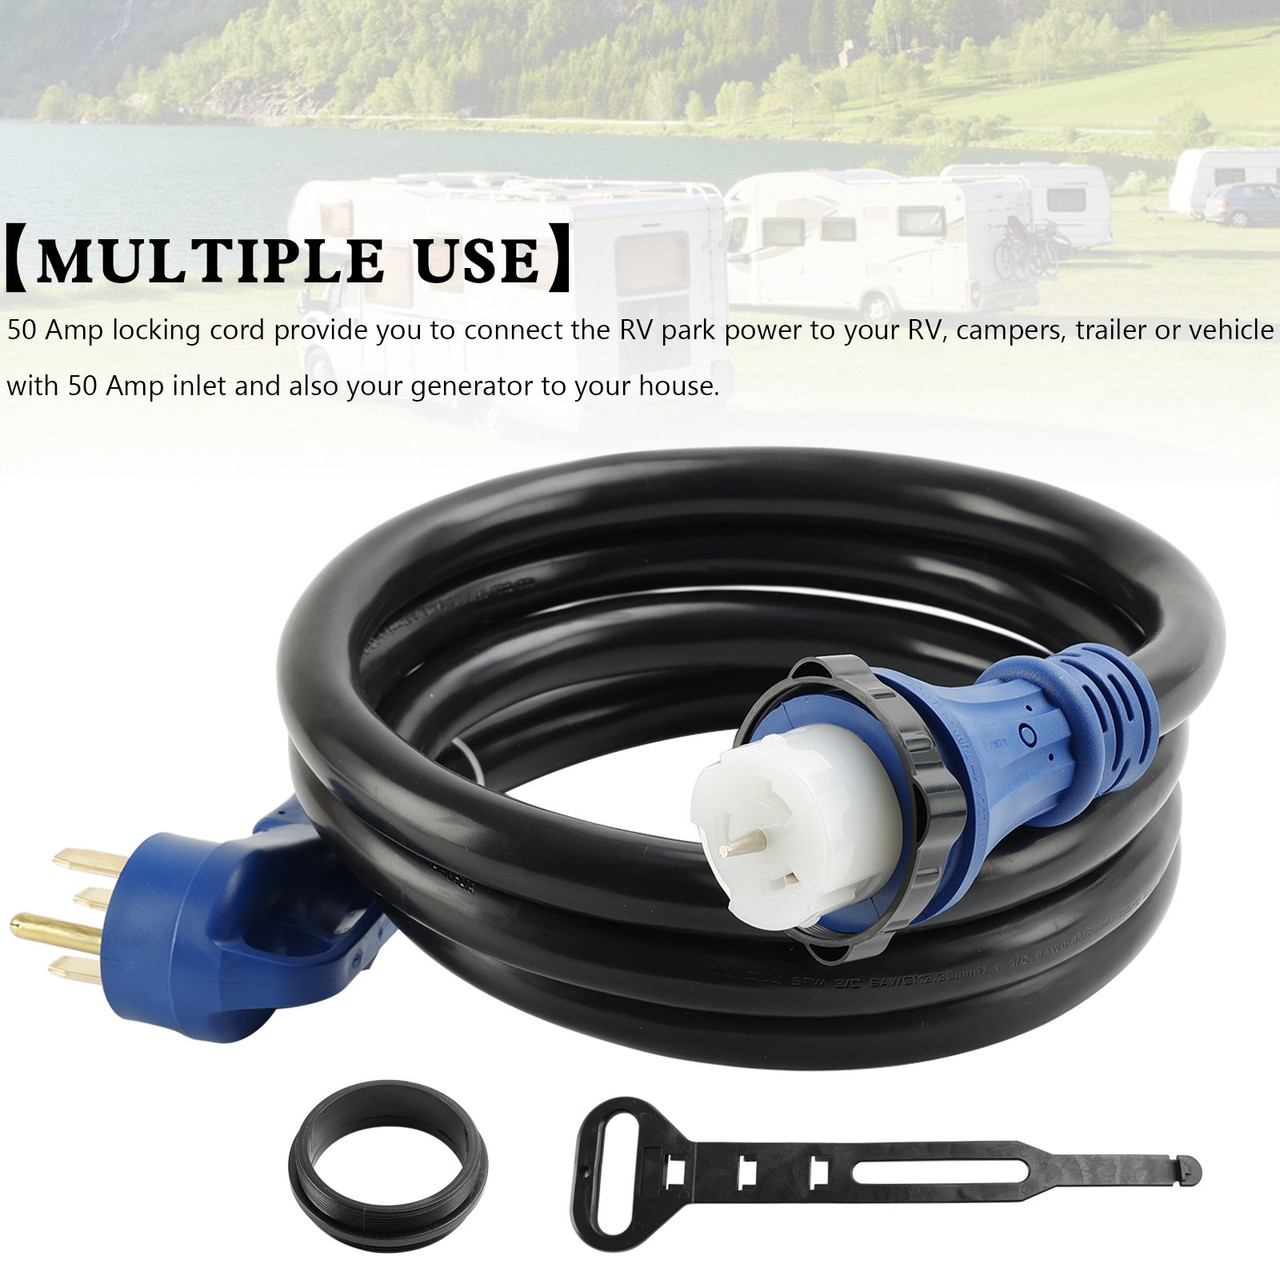 UL Listed 50 Amp 10 Ft RV/Generator Cord With Locking Connector For RV Camper